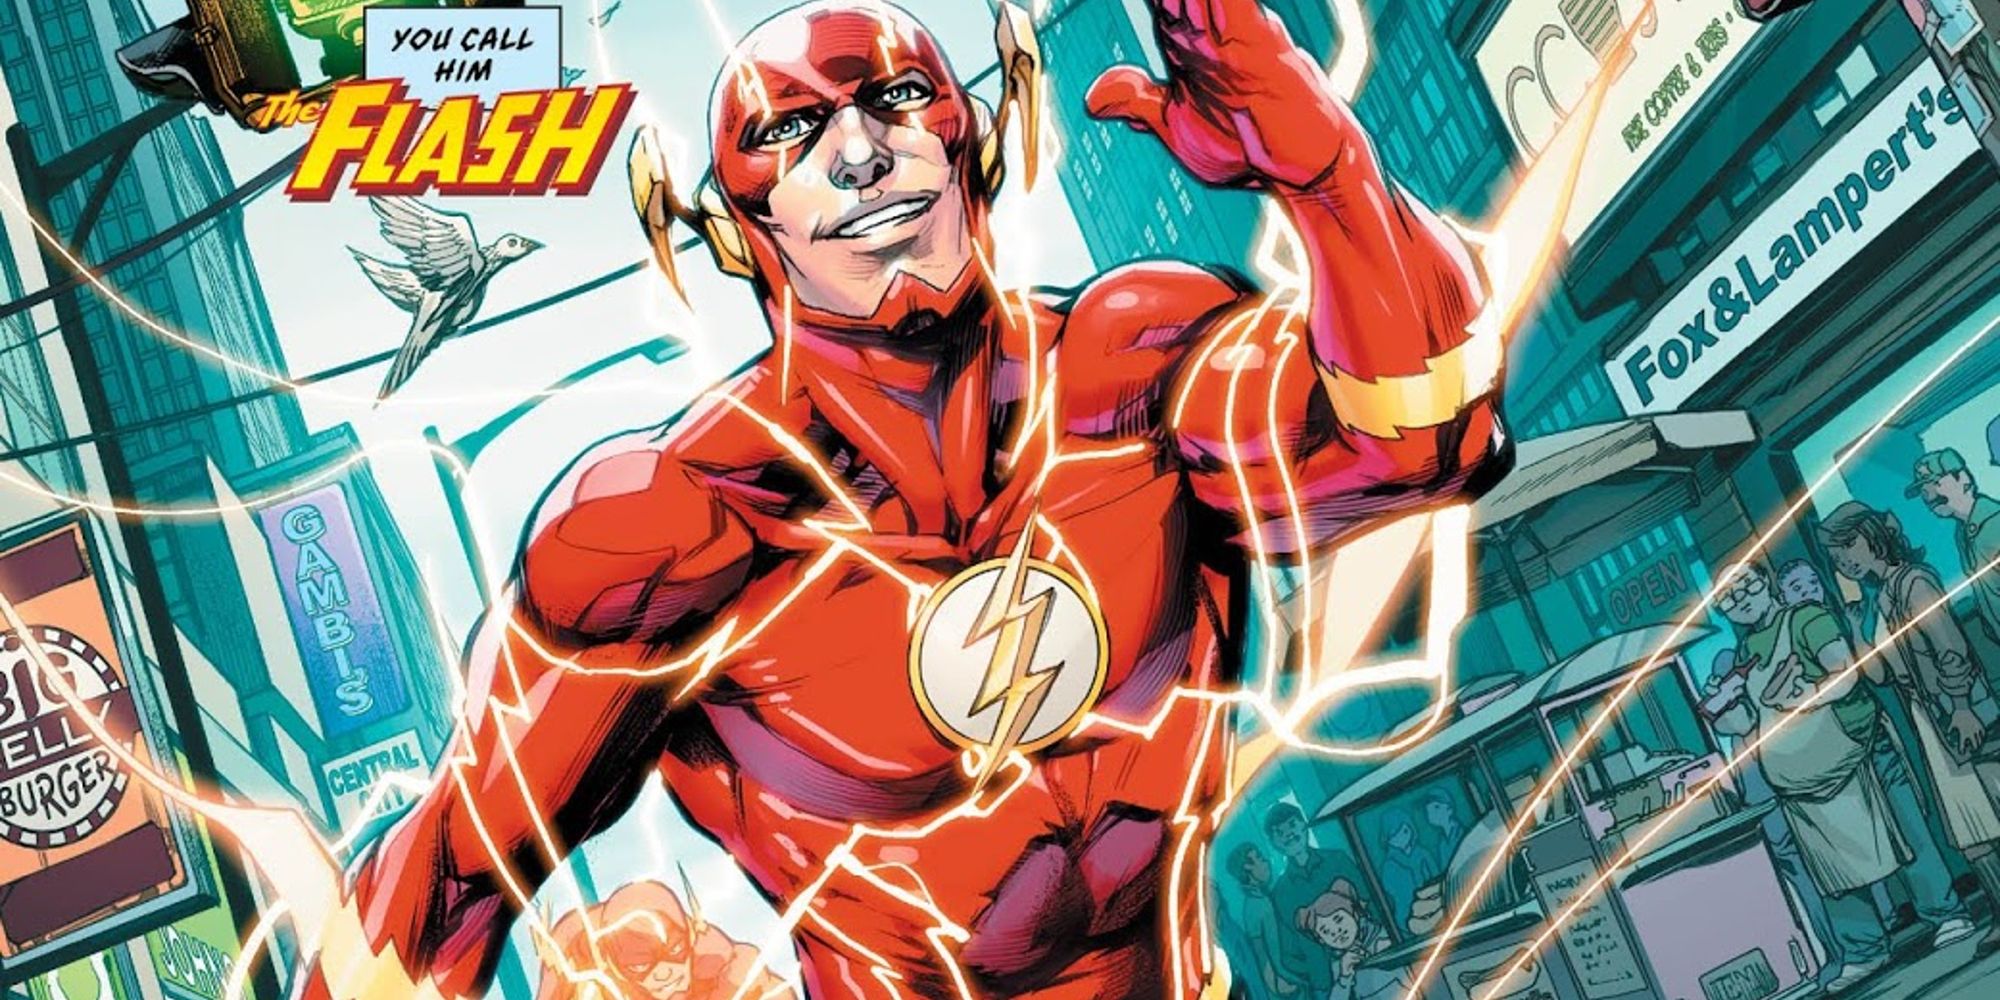 The Flash running through the streets of Central City in The Flash #88